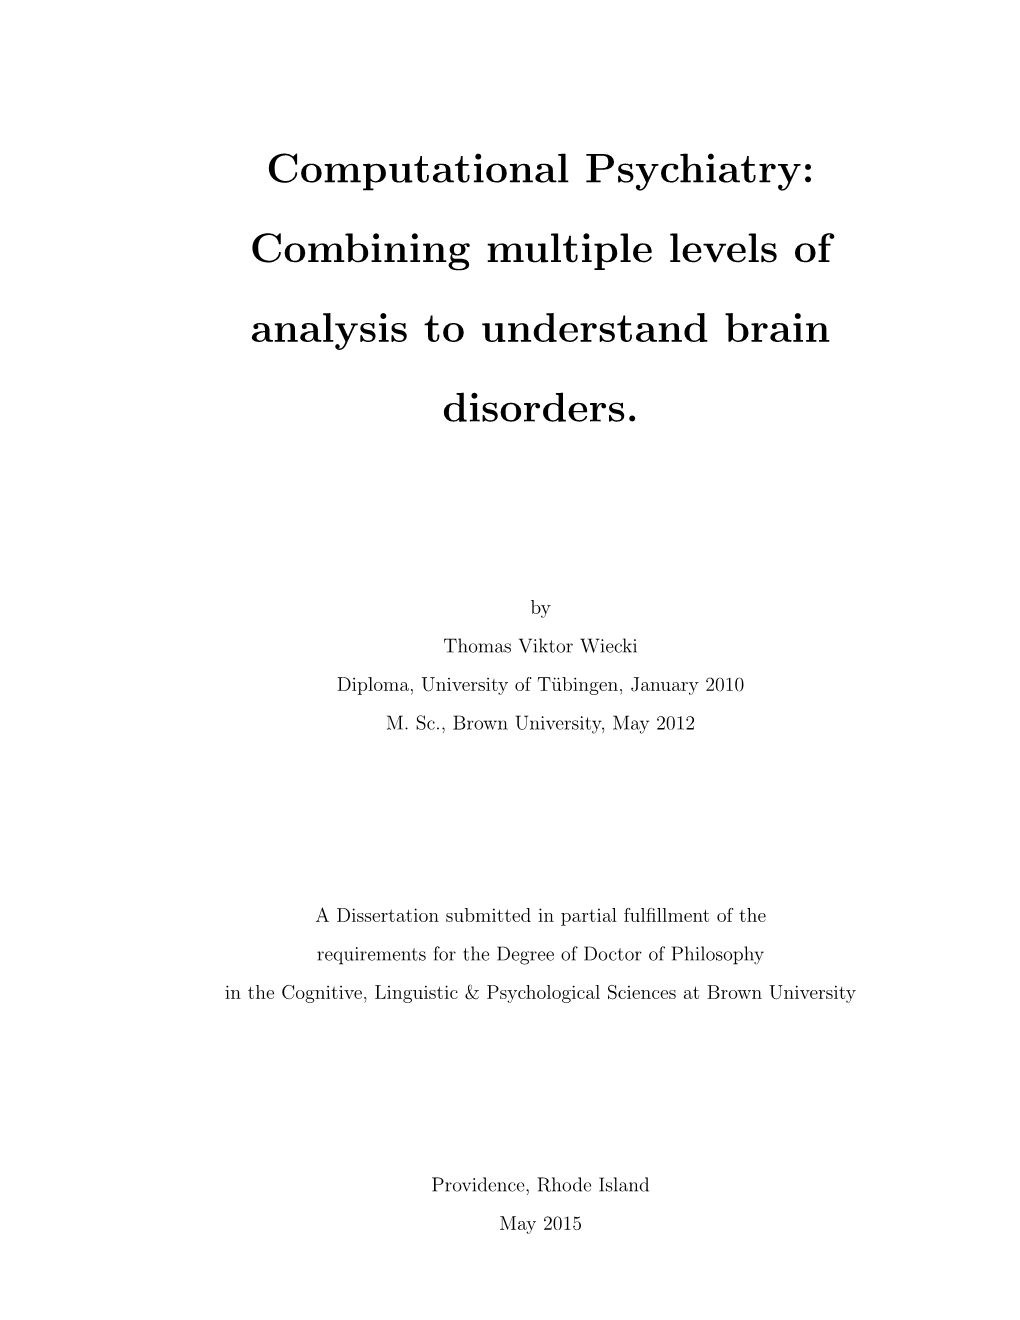 Computational Psychiatry: Combining Multiple Levels of Analysis to Understand Brain Disorders